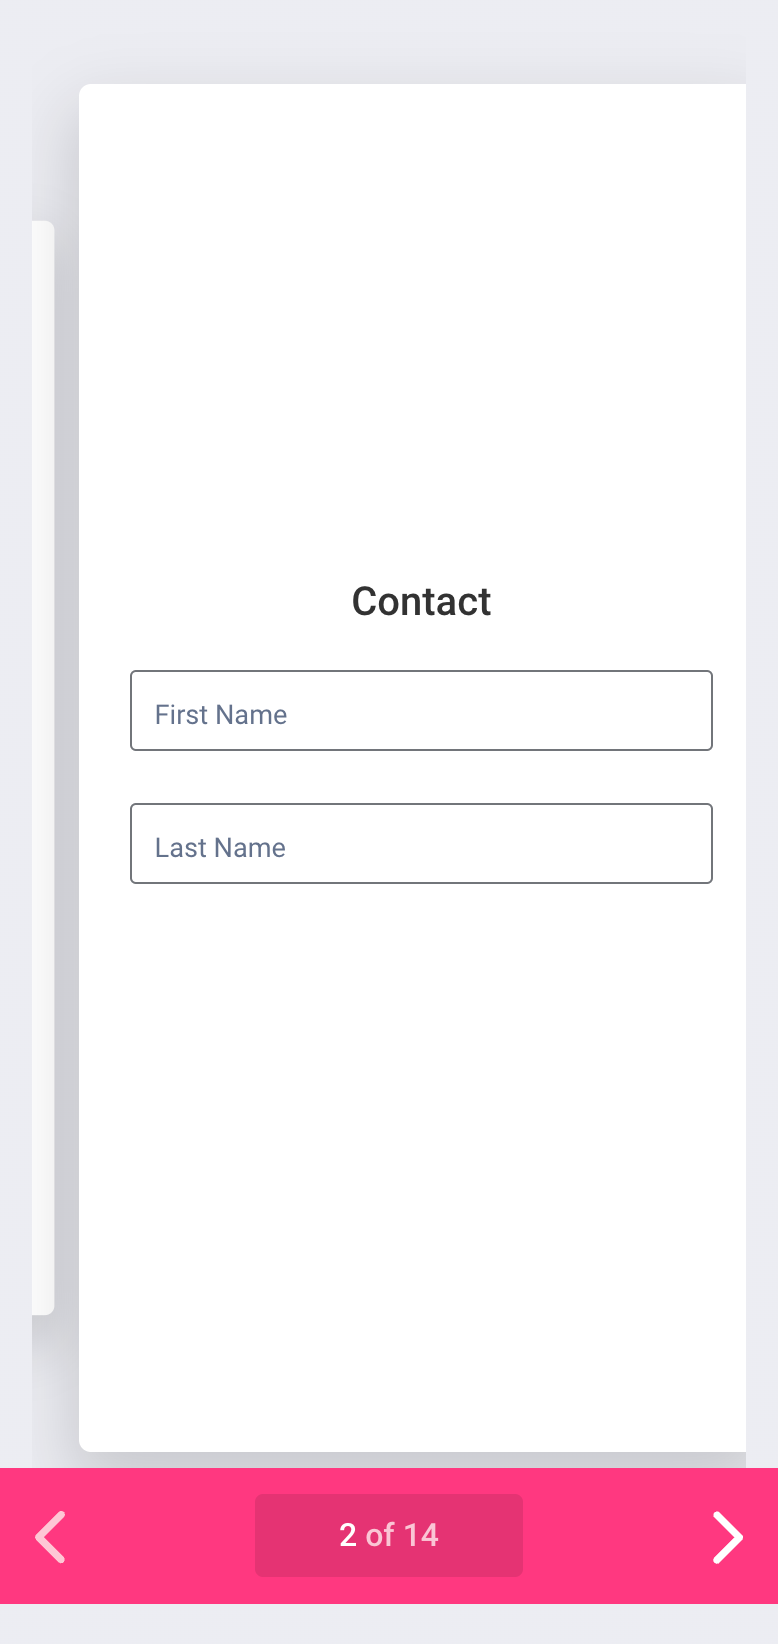 Jotform card form layout example (multi-line field)